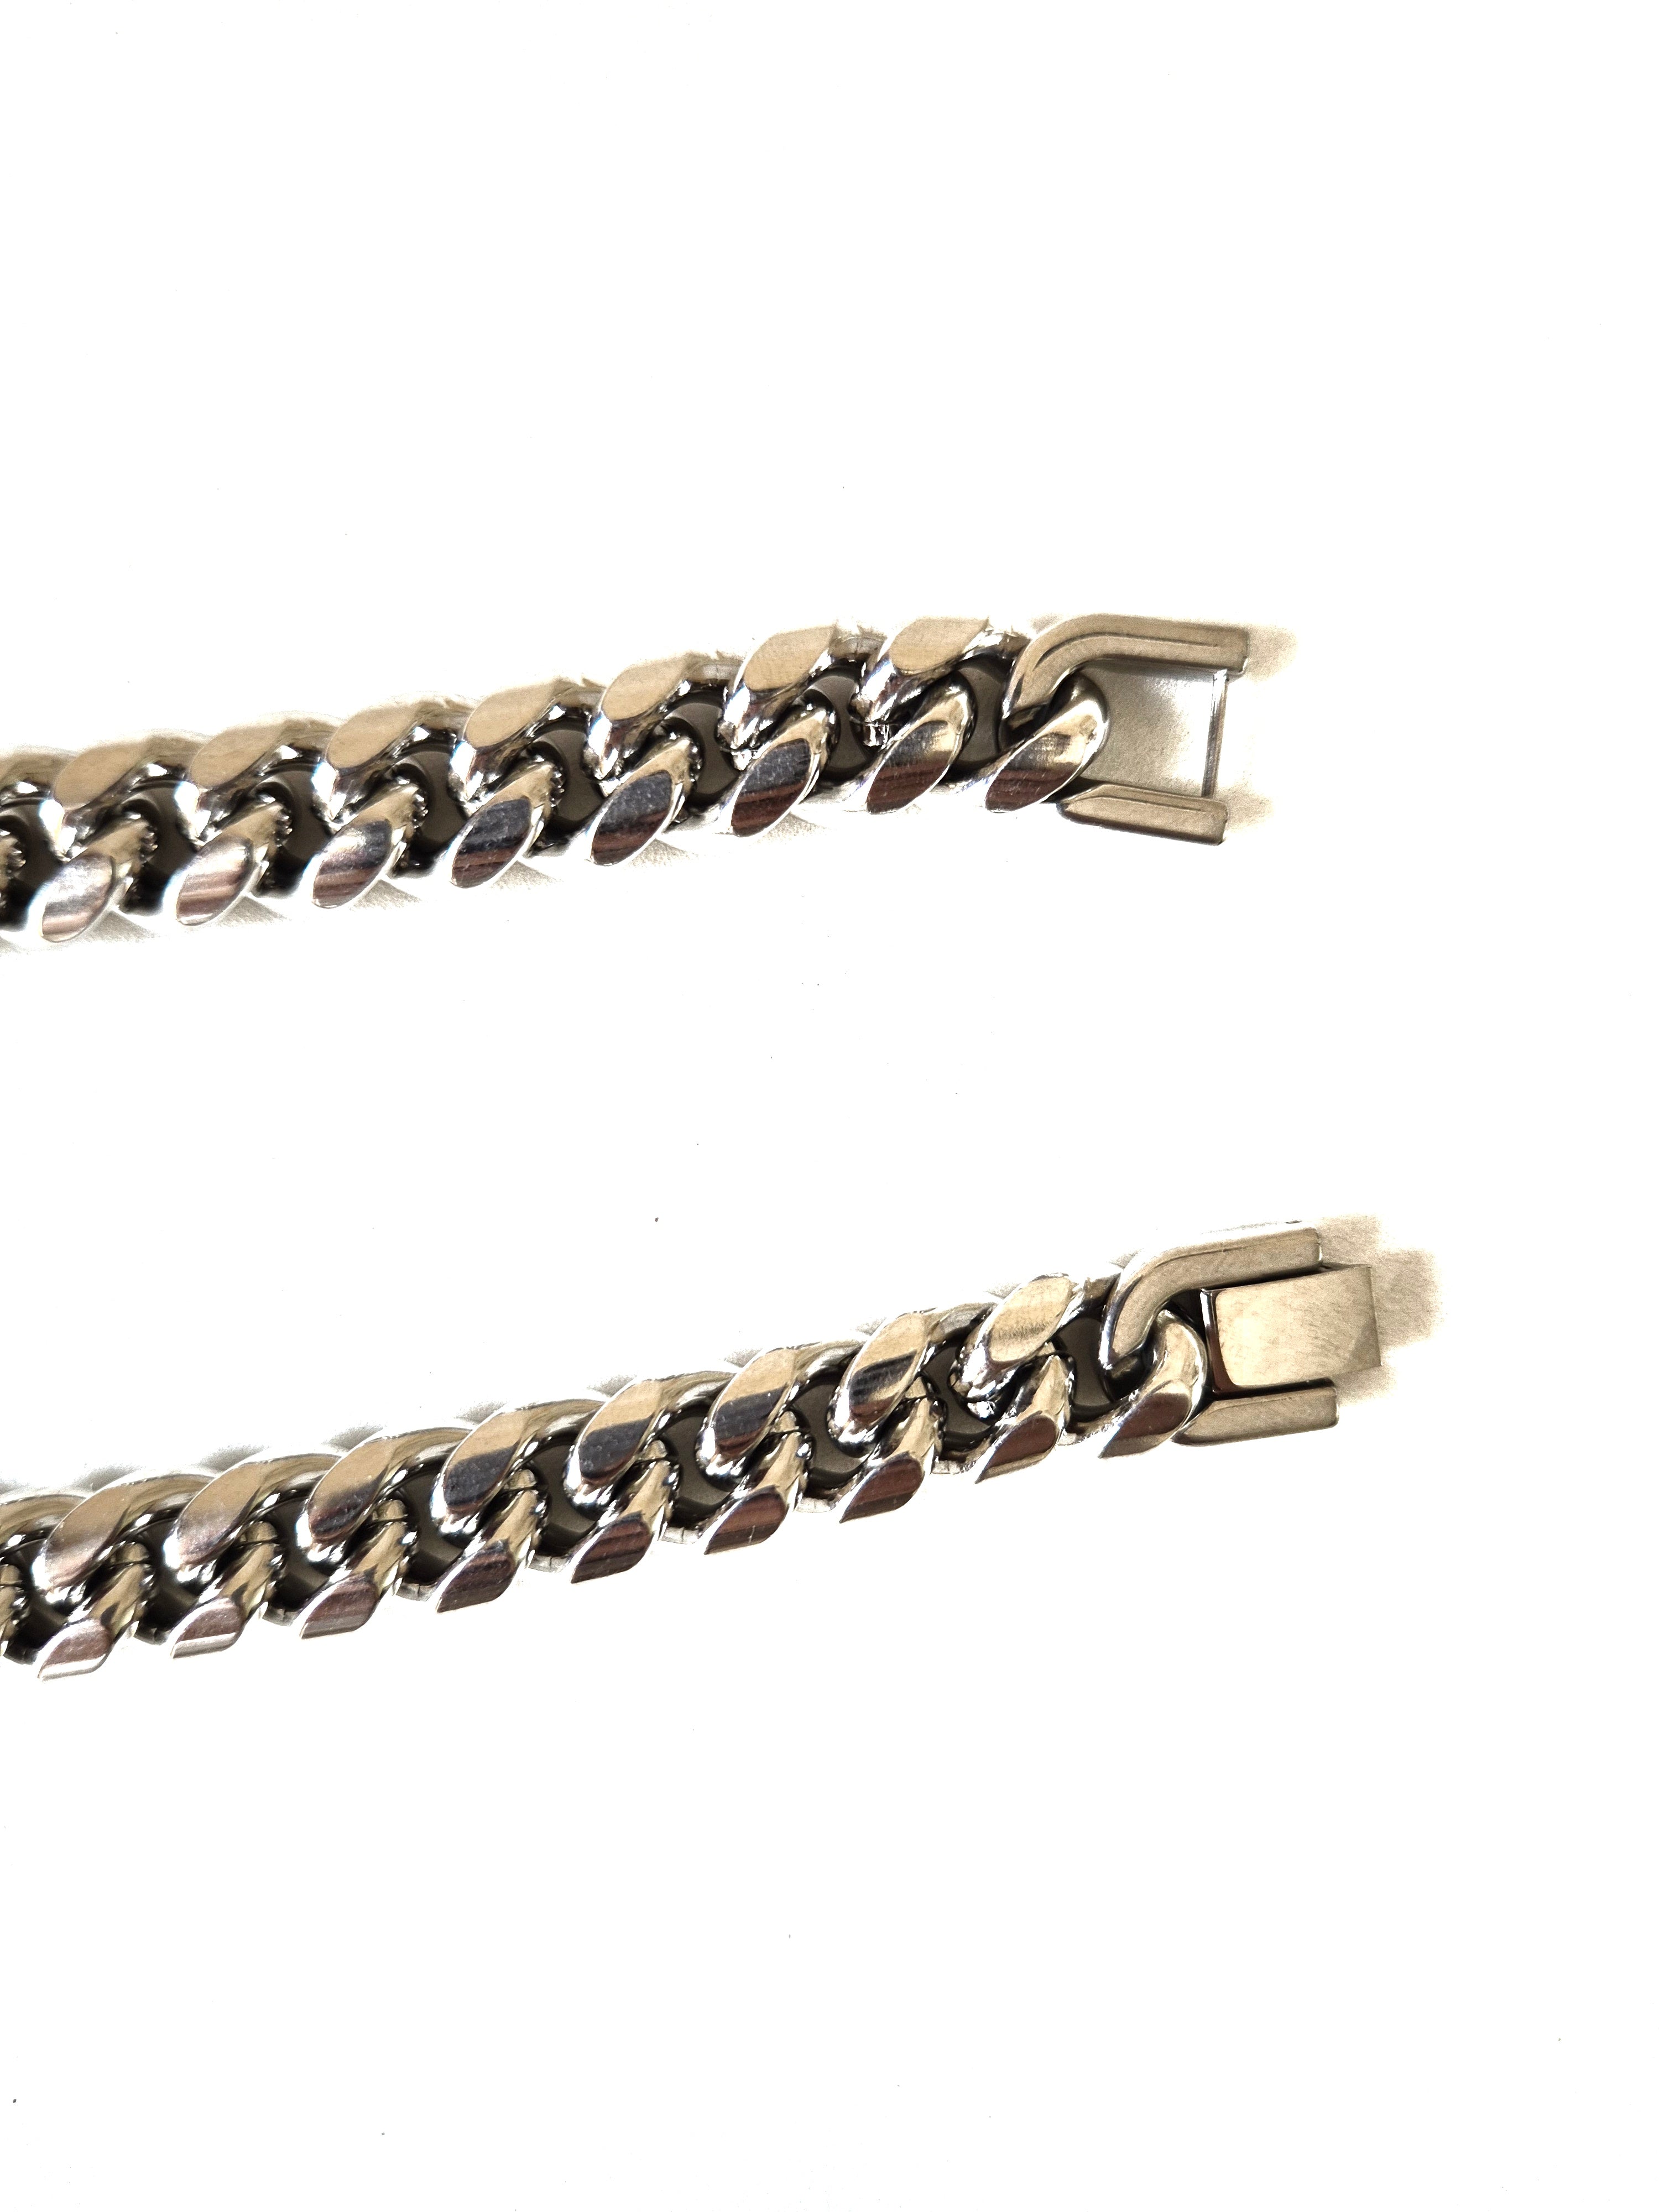 Miami cuban link Chain in white gold - 12mm by Freshice